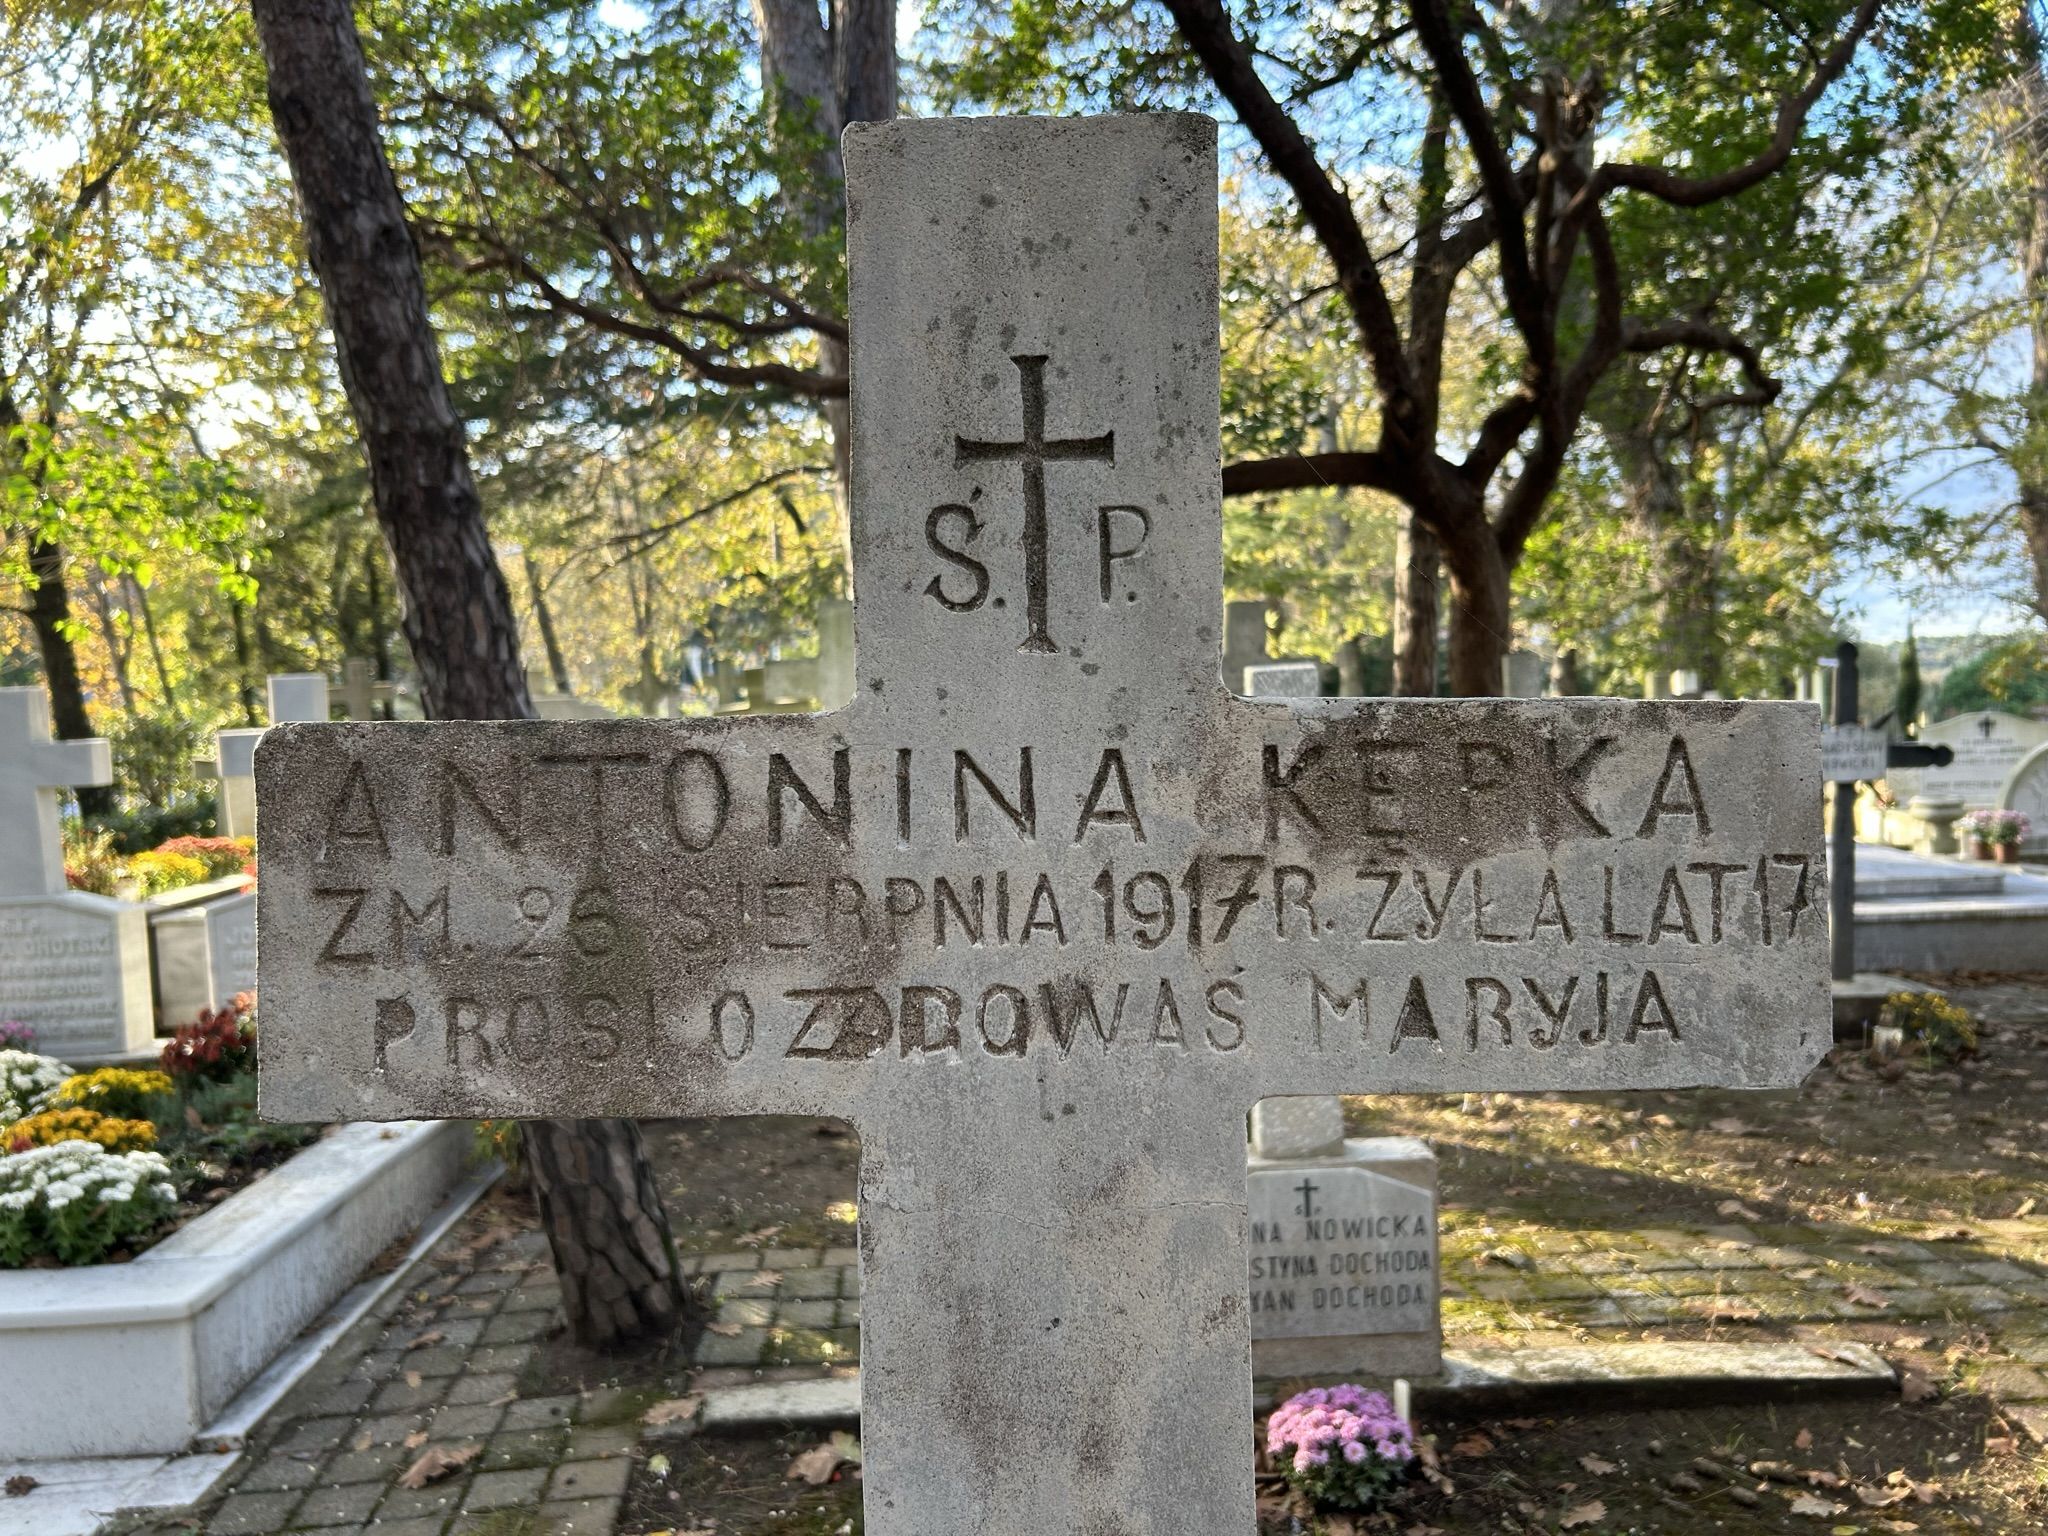 Inscription from the tombstone of Antonina Kępka, Catholic cemetery in Adampol